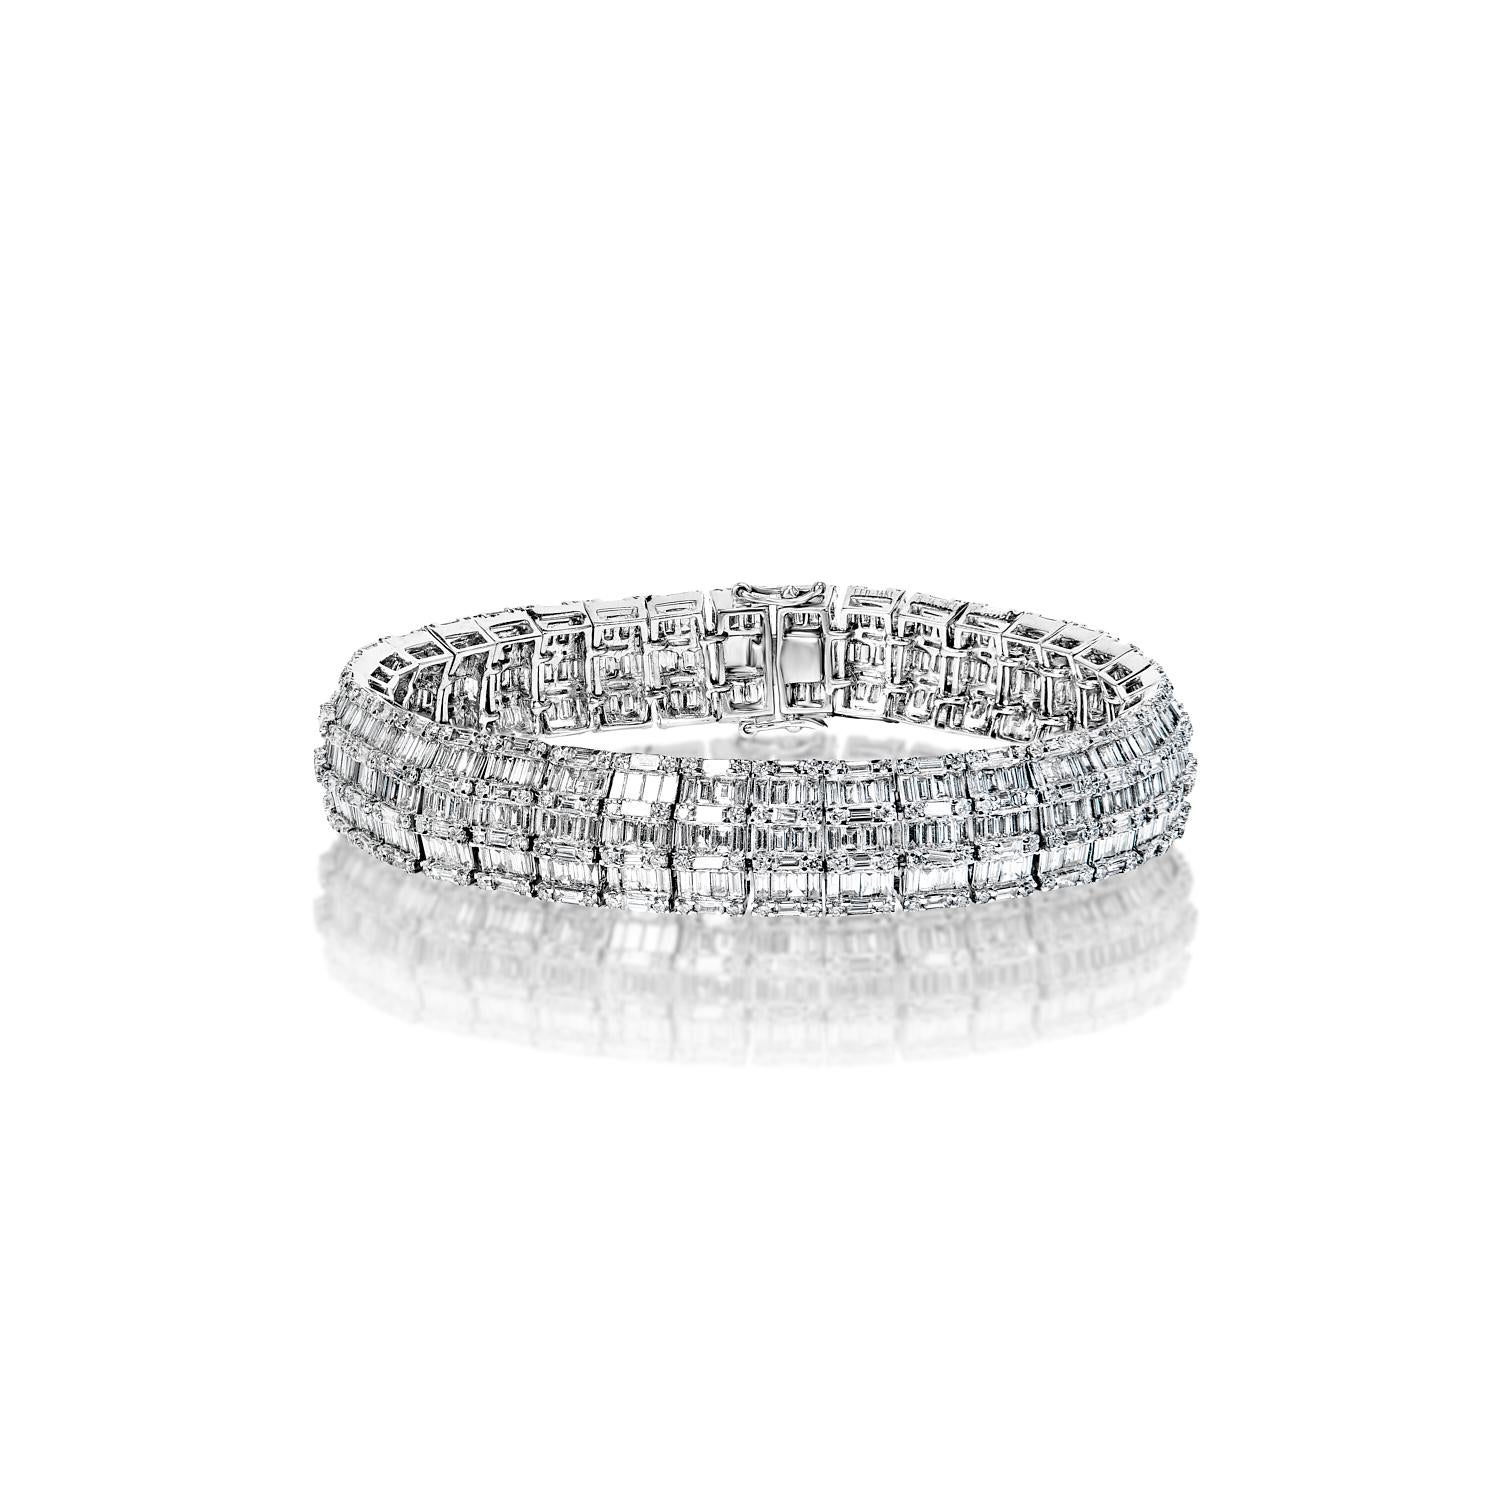 The ELODIE 17 Carat Diamond Tennis Bracelet features COMBINE MIX SHAPE DIAMONDS brilliants weighing a total of approximately 17.38 carats, set in 14K White Gold.

Style:
Diamonds 
Diamond Size: 17.38 carats
Diamond Shape: Combine Mix Shape
Metal: 14